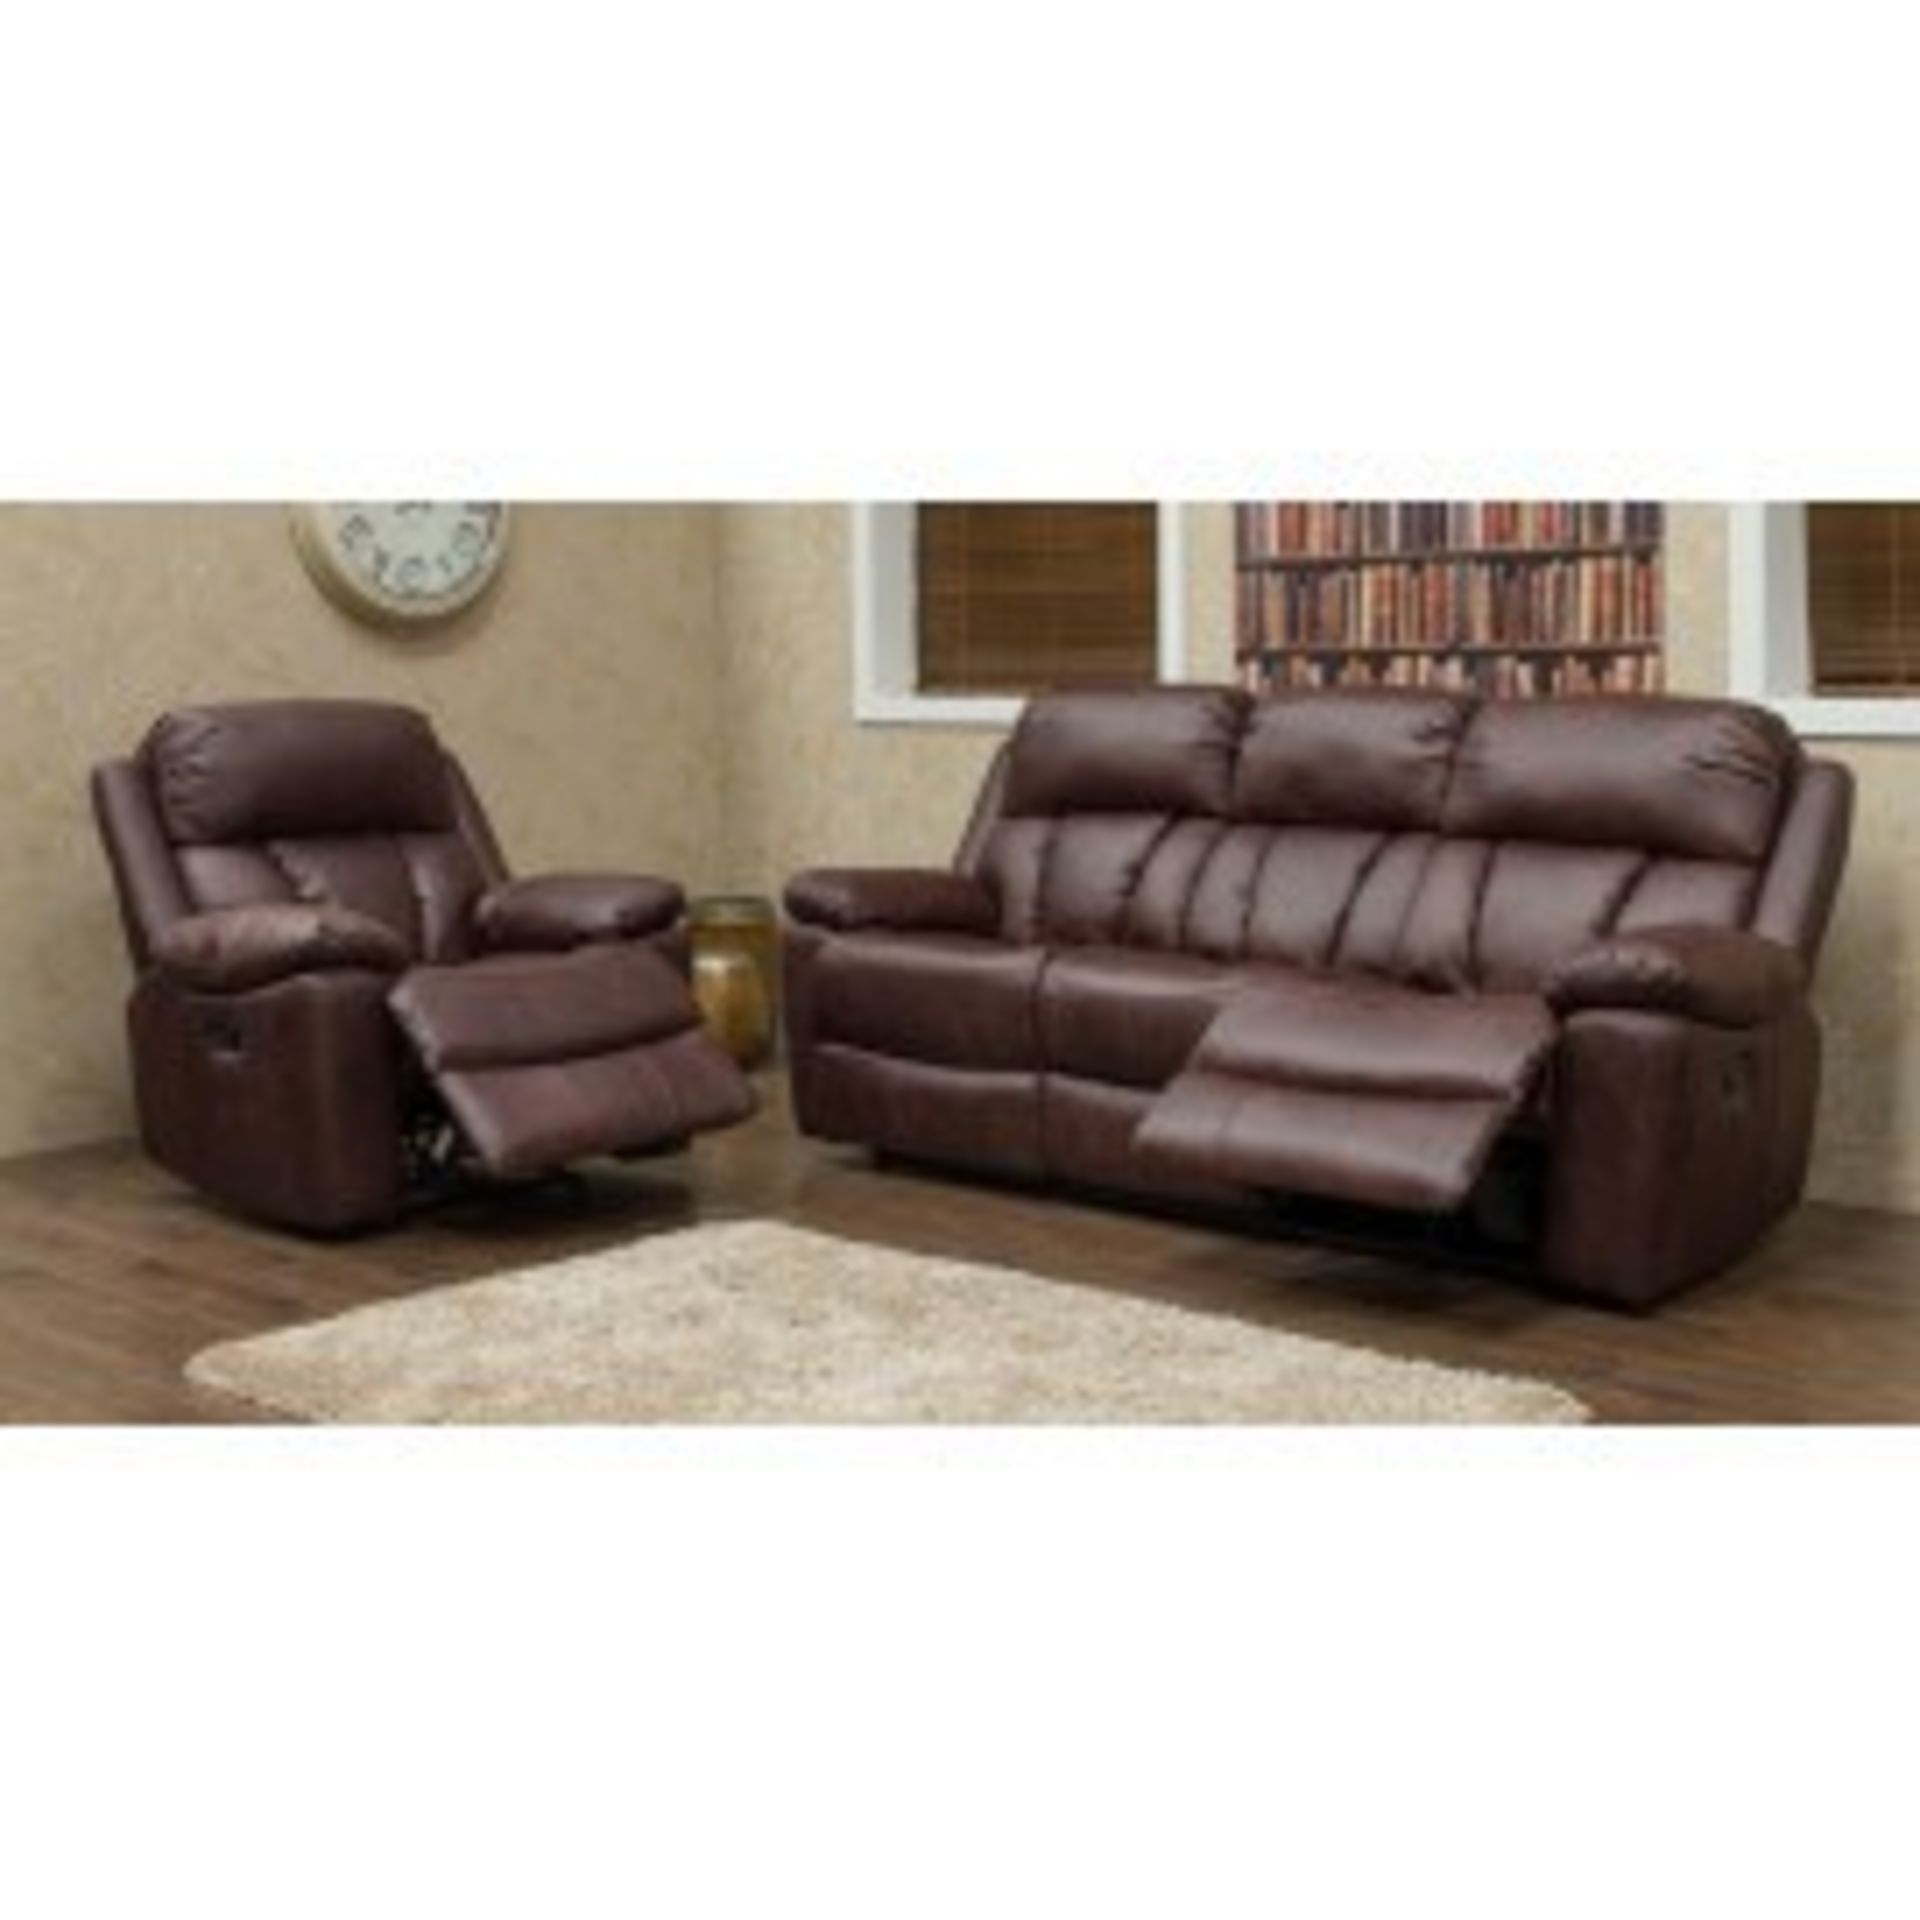 Brand New Boxed Benson 3 Seater Chestnut Leatheraire Reclining Sofa Plus 2 Matching Arm Chairs